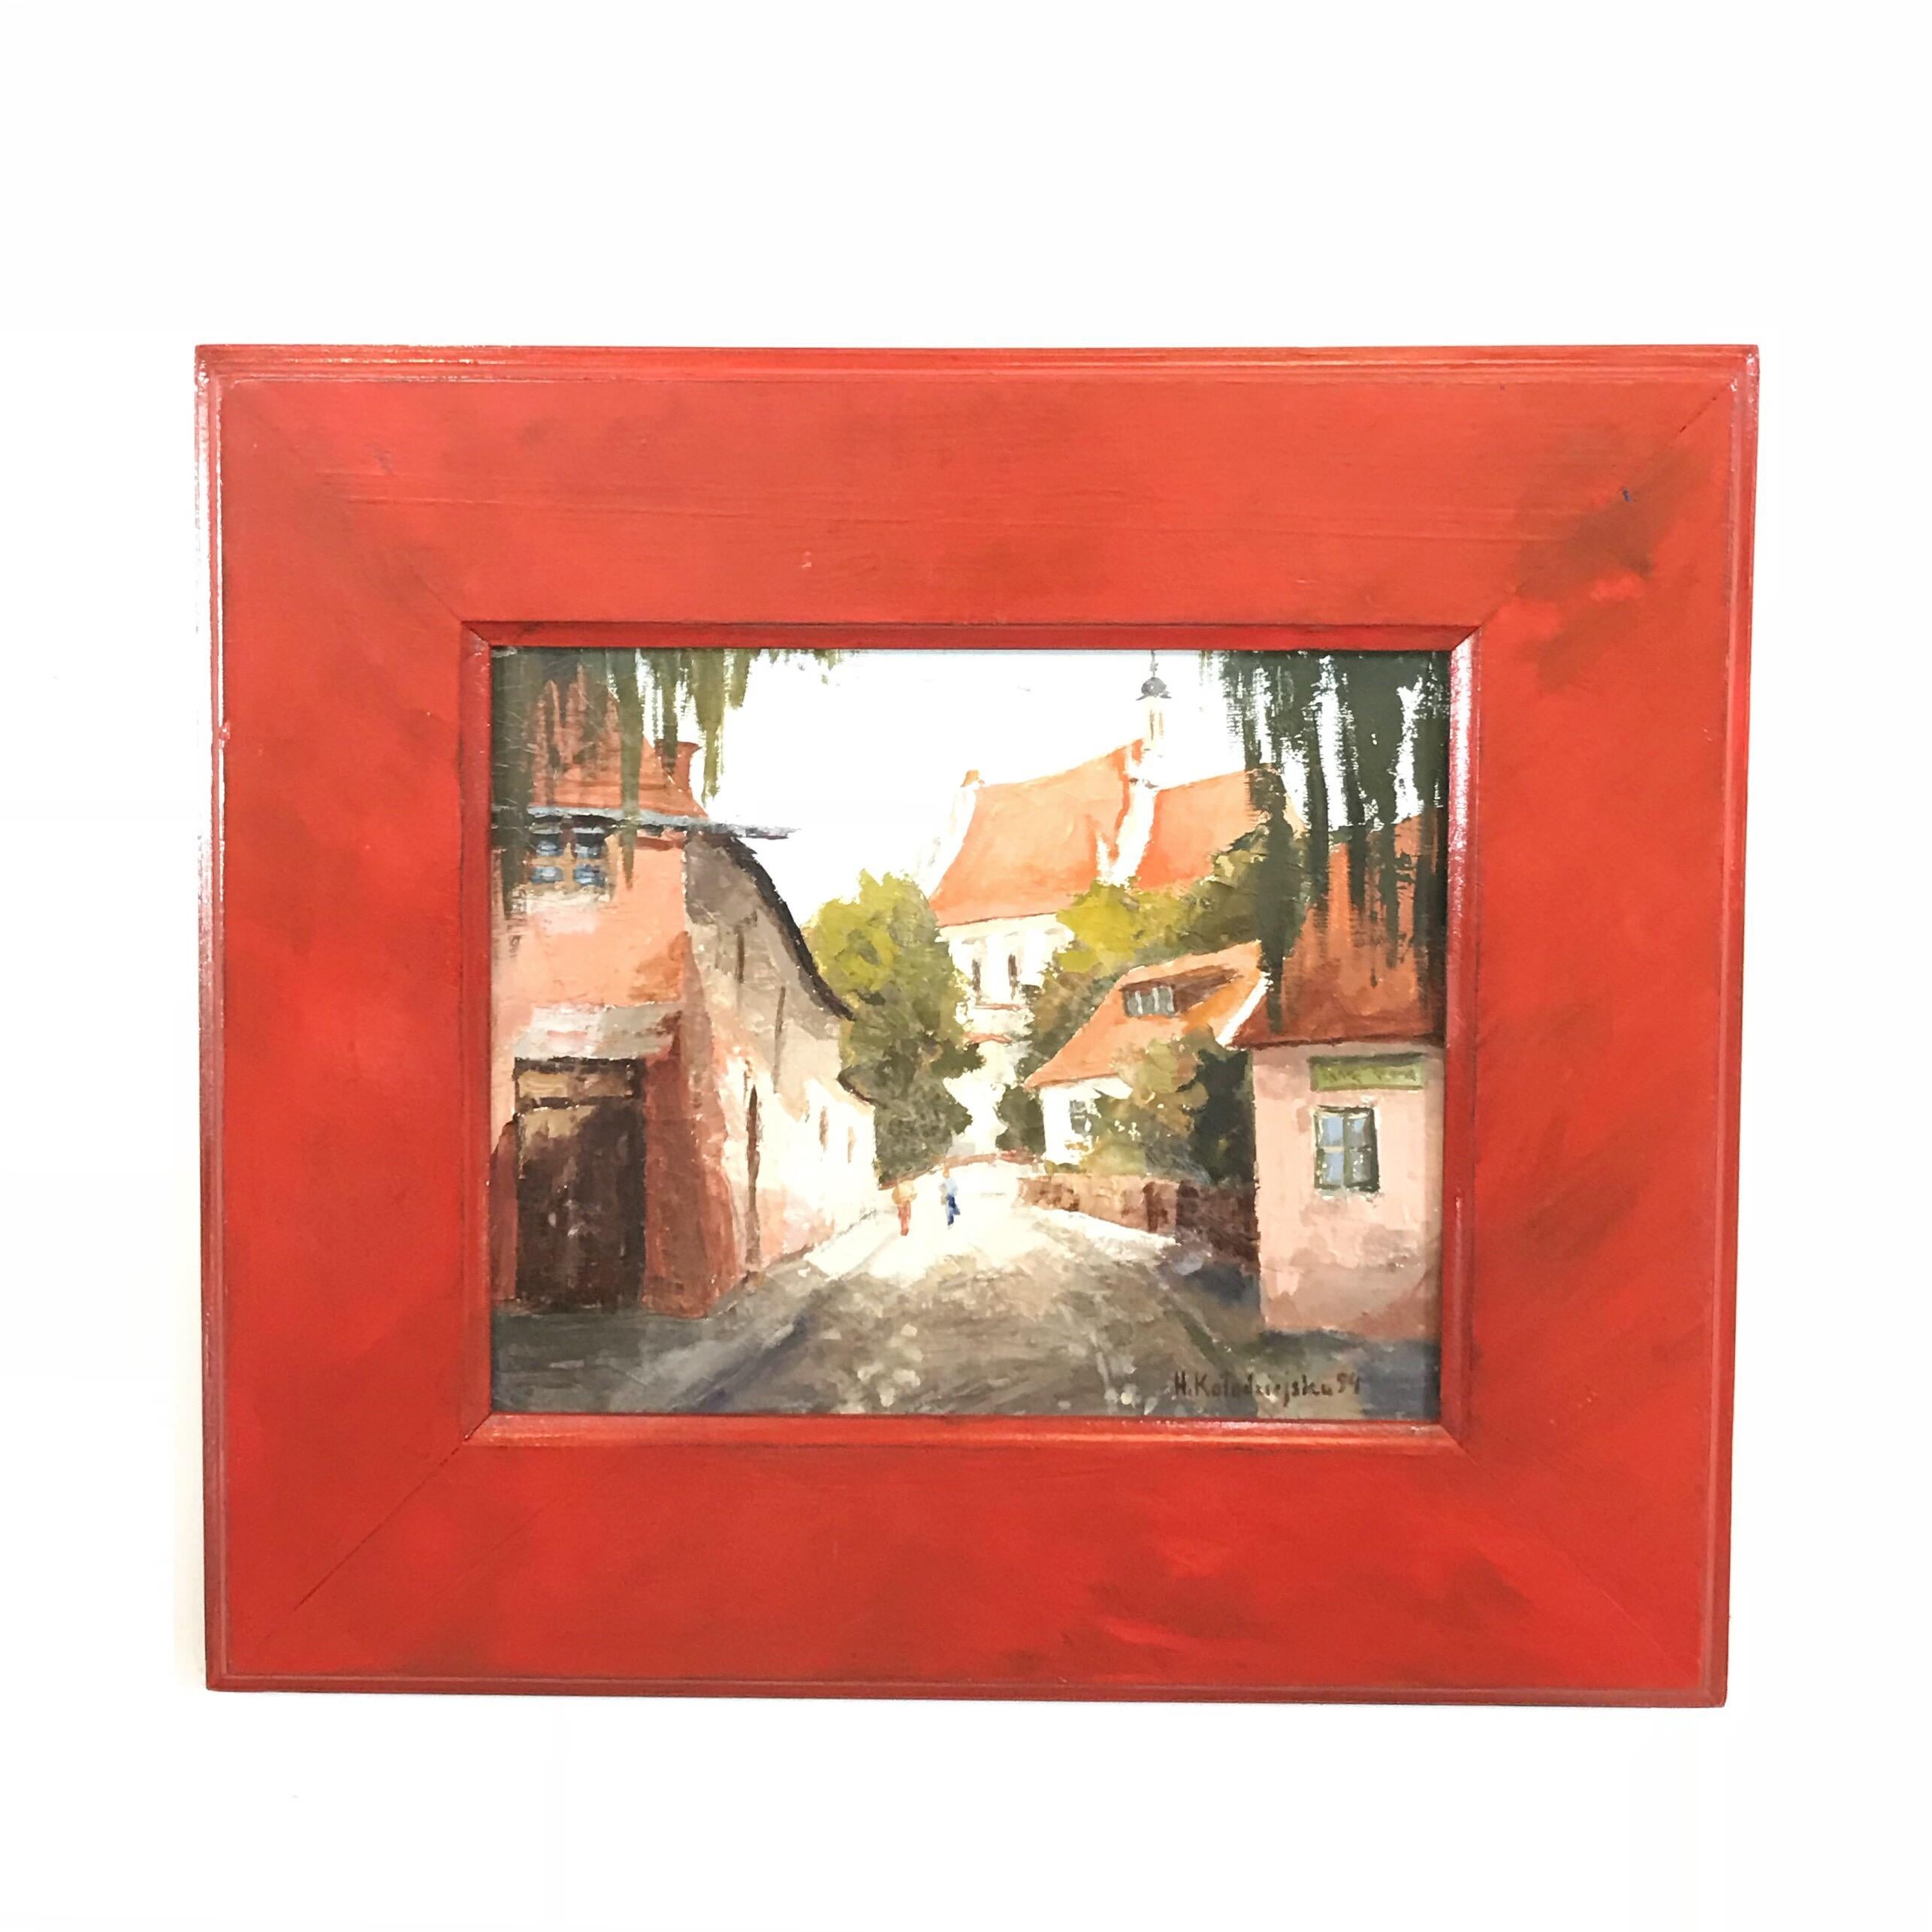 A pretty and diminutive oil painting of a Provincial country town. The eastern European painting has a warm and dreamy palette and is signed front lower right with additional info on the artist and work on the back. Perhaps this is a hidden art